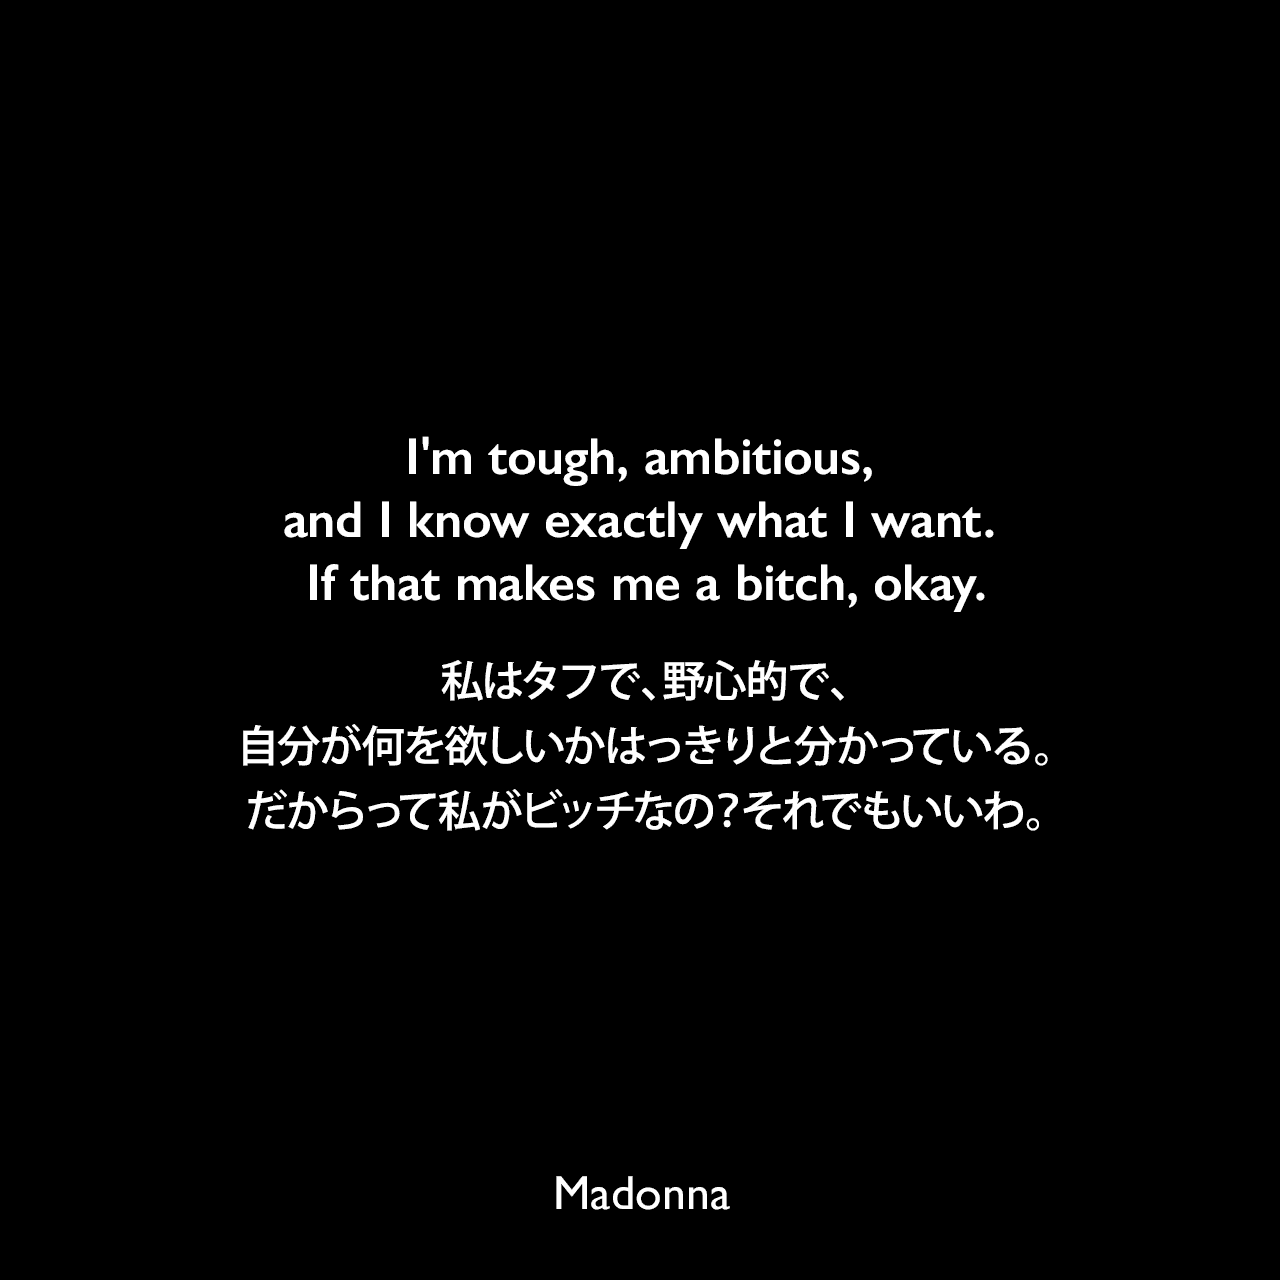 I'm tough, ambitious, and I know exactly what I want. If that makes me a bitch, okay.私はタフで、野心的で、自分が何を欲しいかはっきりと分かっている。だからって私がビッチなの？それでもいいわ。- 1992年7月のピープル誌よりMadonna